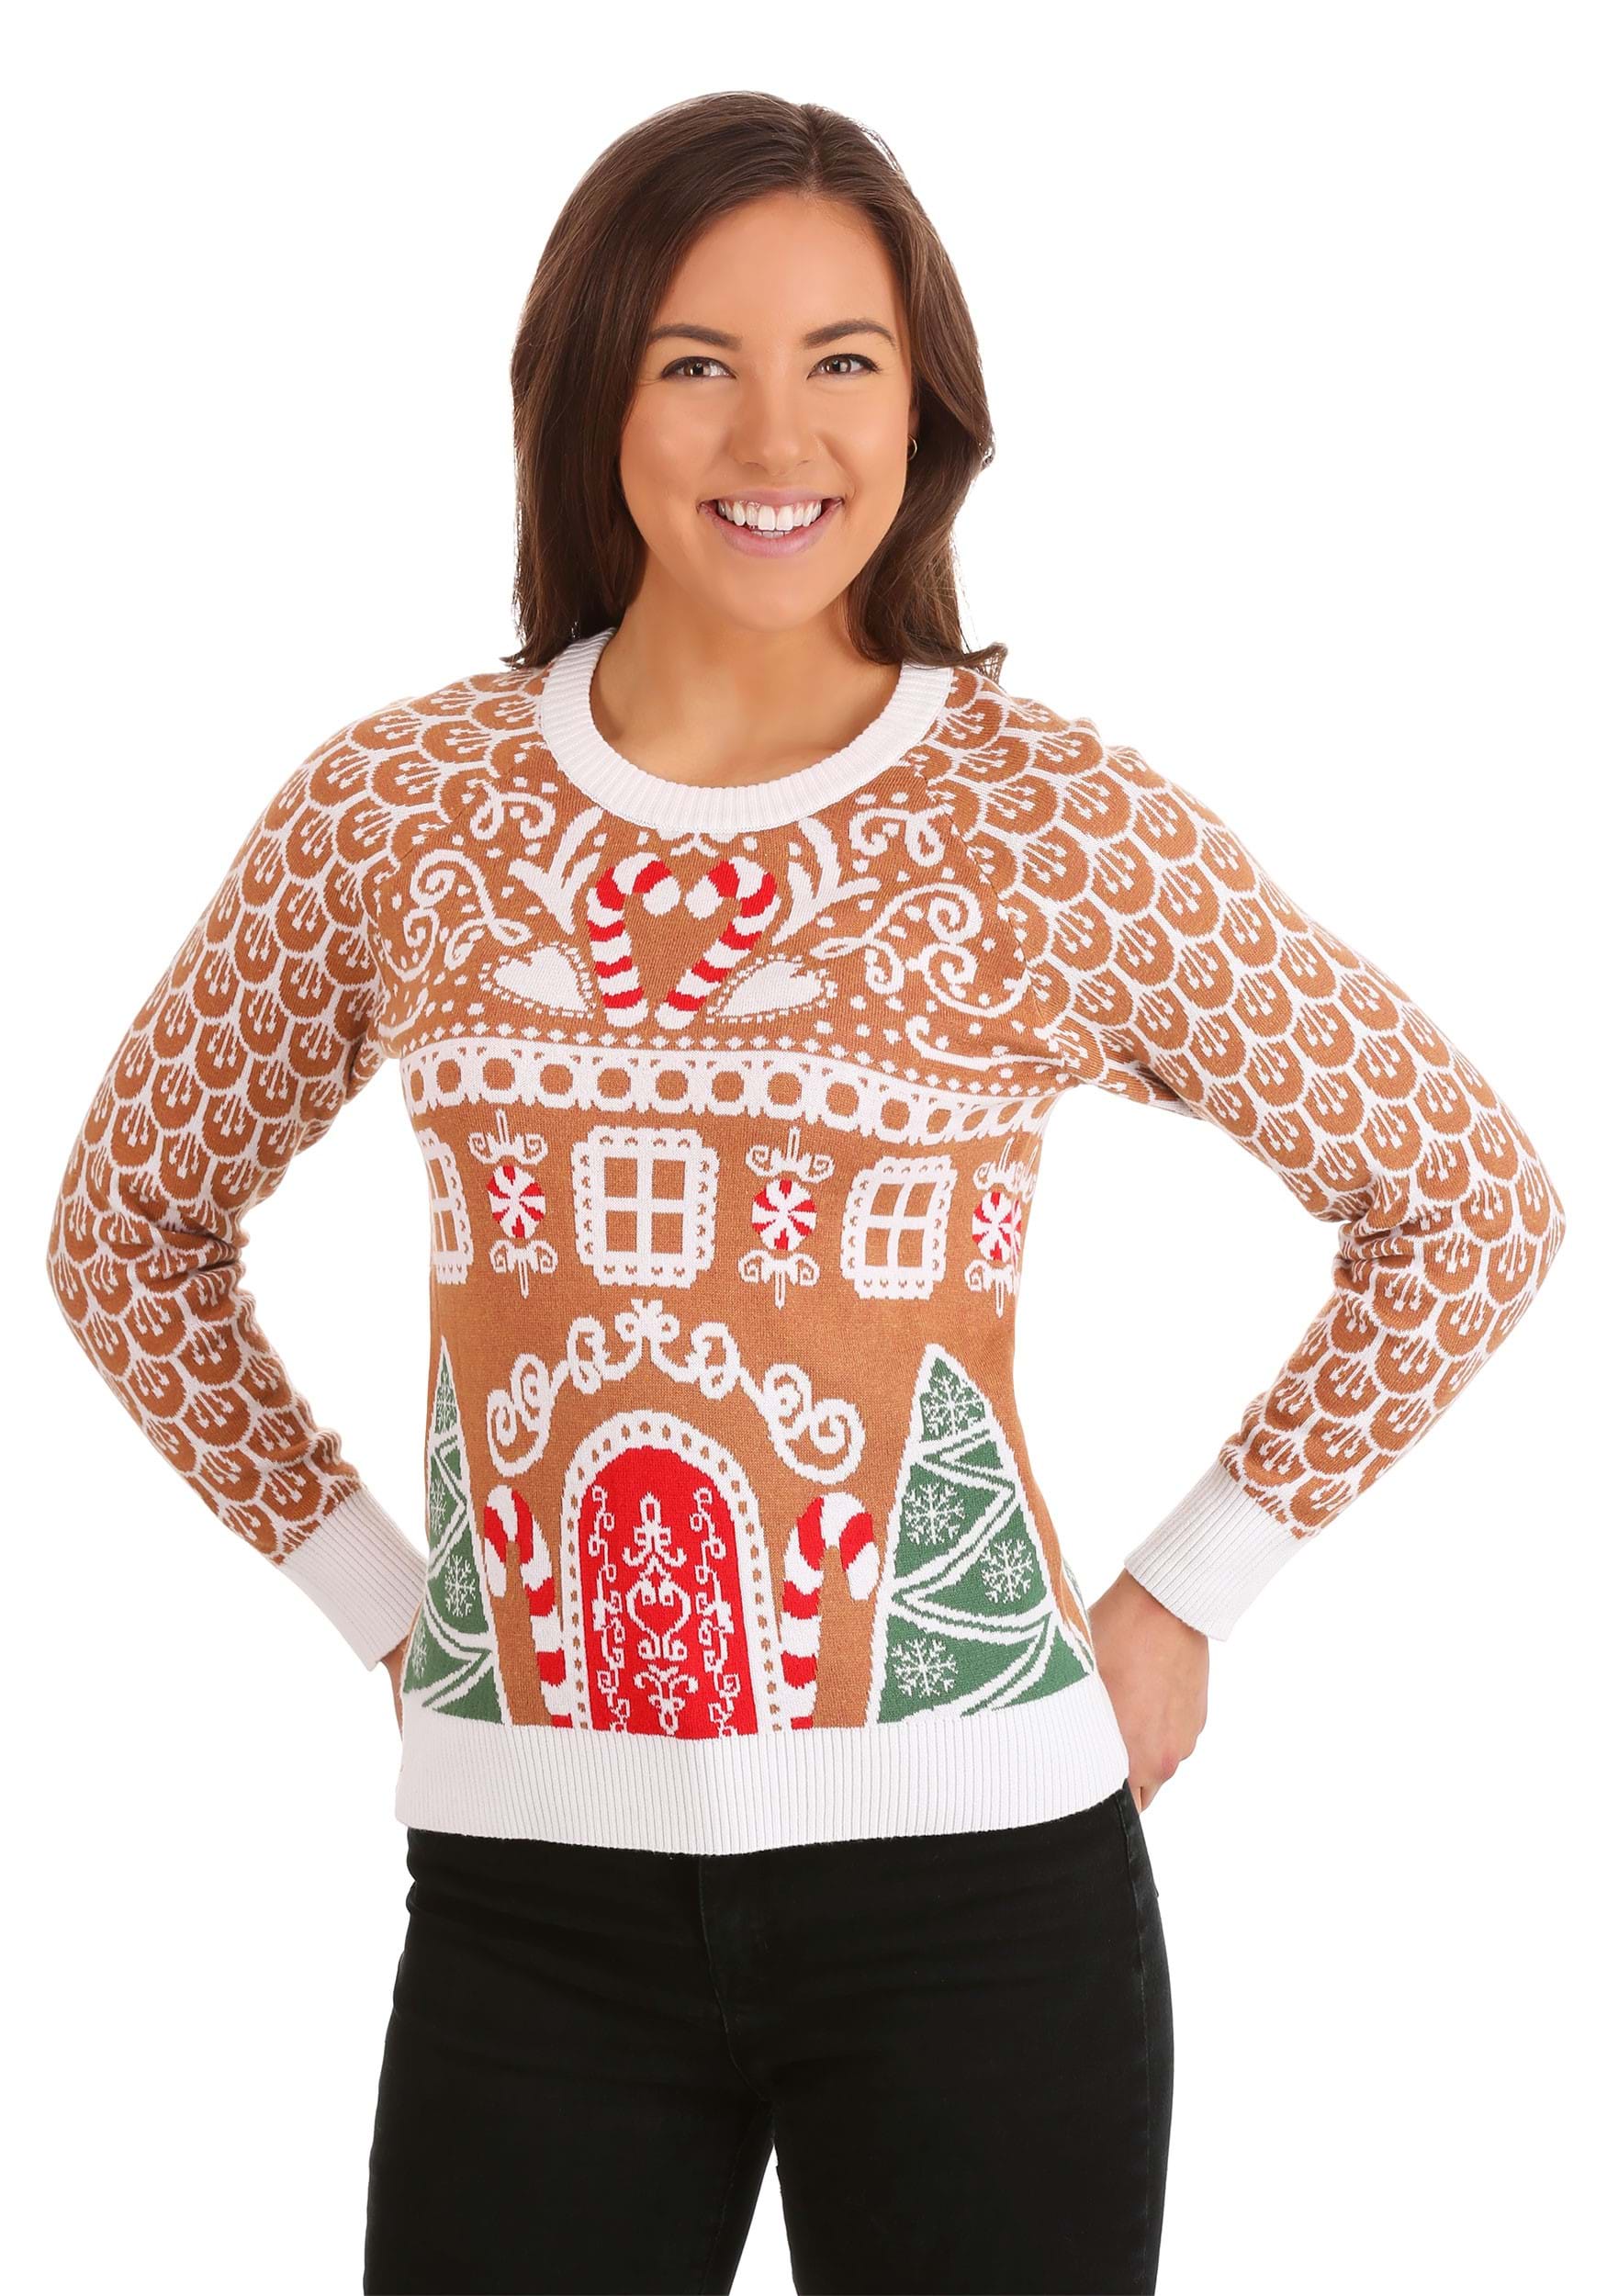 Gingerbread House Womens Ugly Christmas Sweater